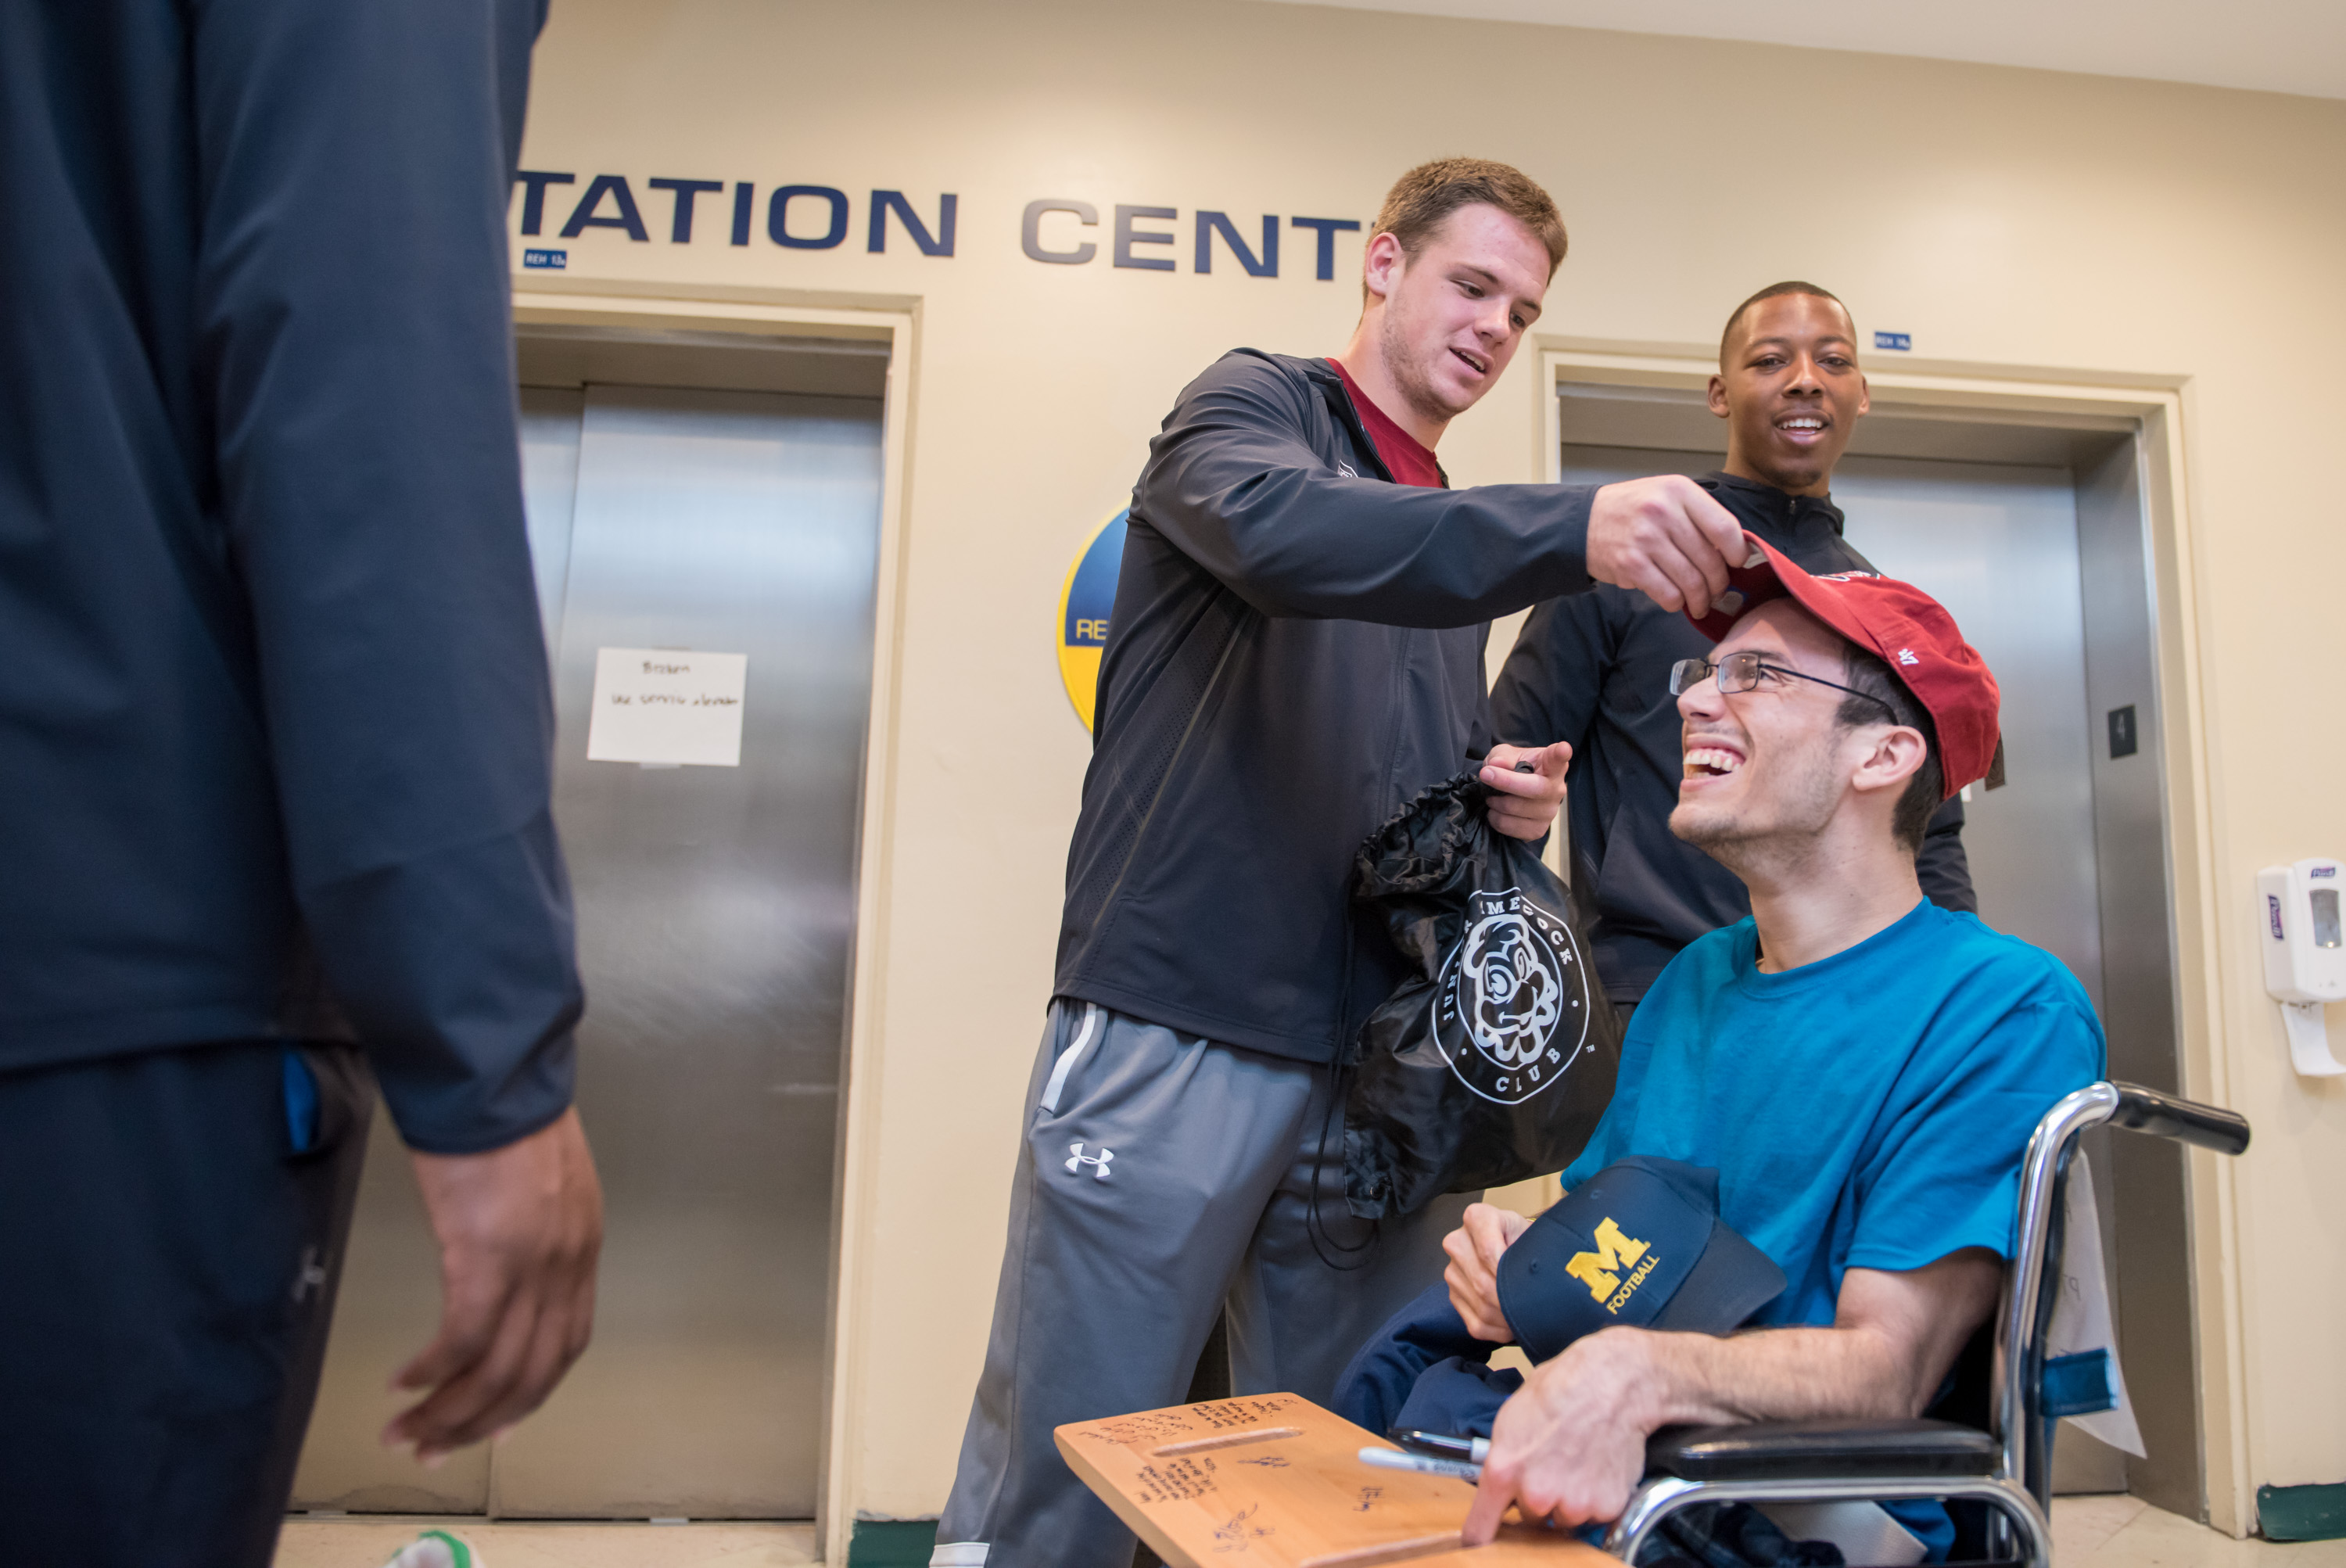 Outback bowl players visits male patient